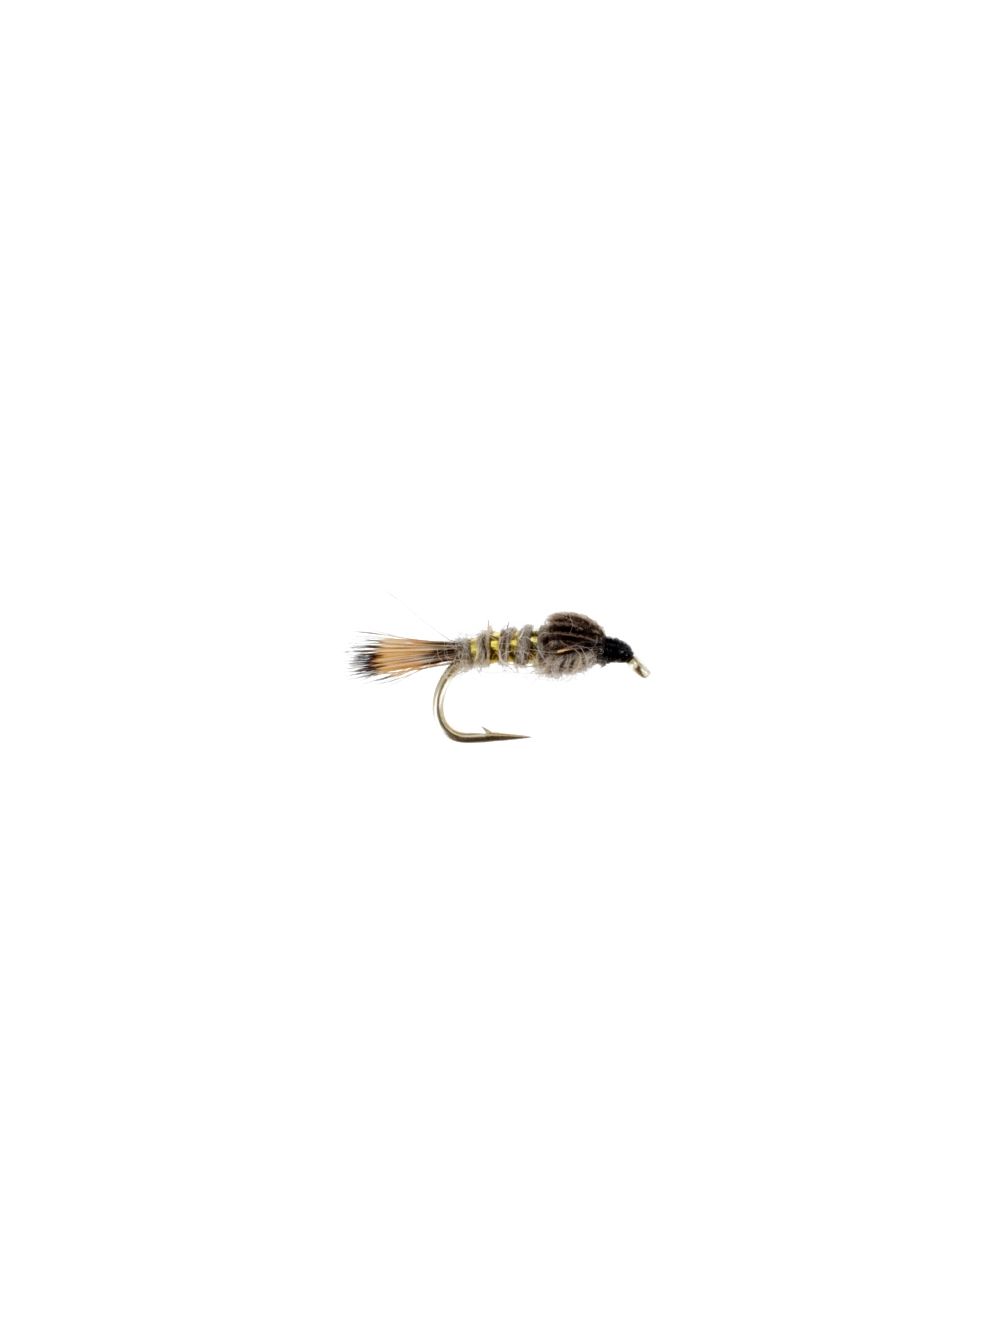 Parachute Hare's Ear Dry Fly | Size 12 | Orvis